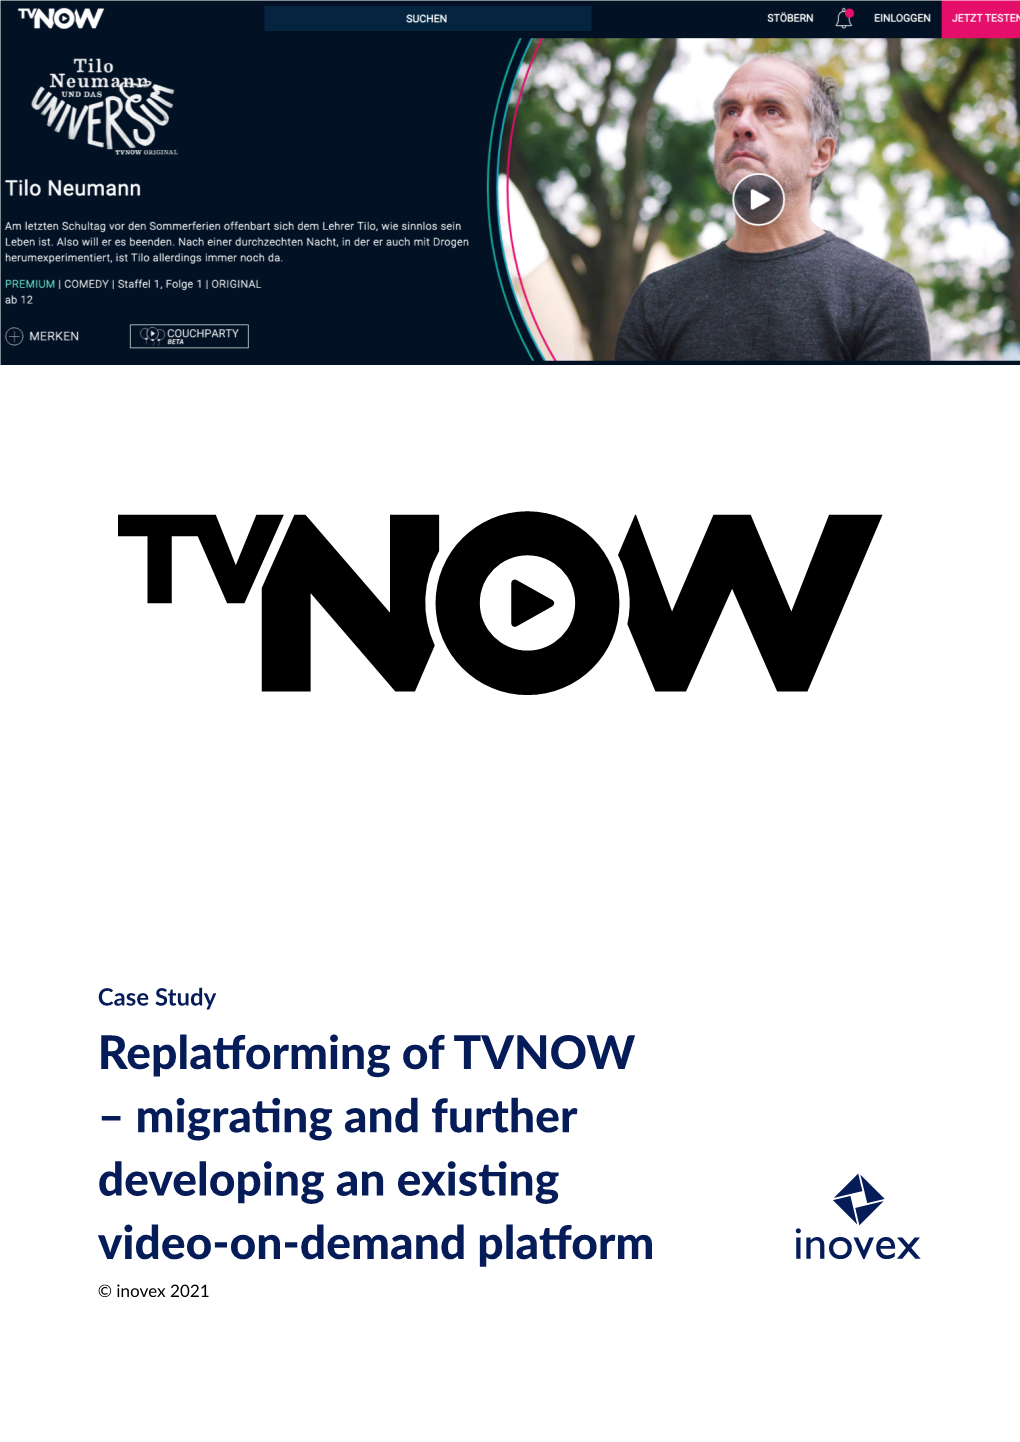 Replatforming of TVNOW – Migrating and Further Developing an Existing